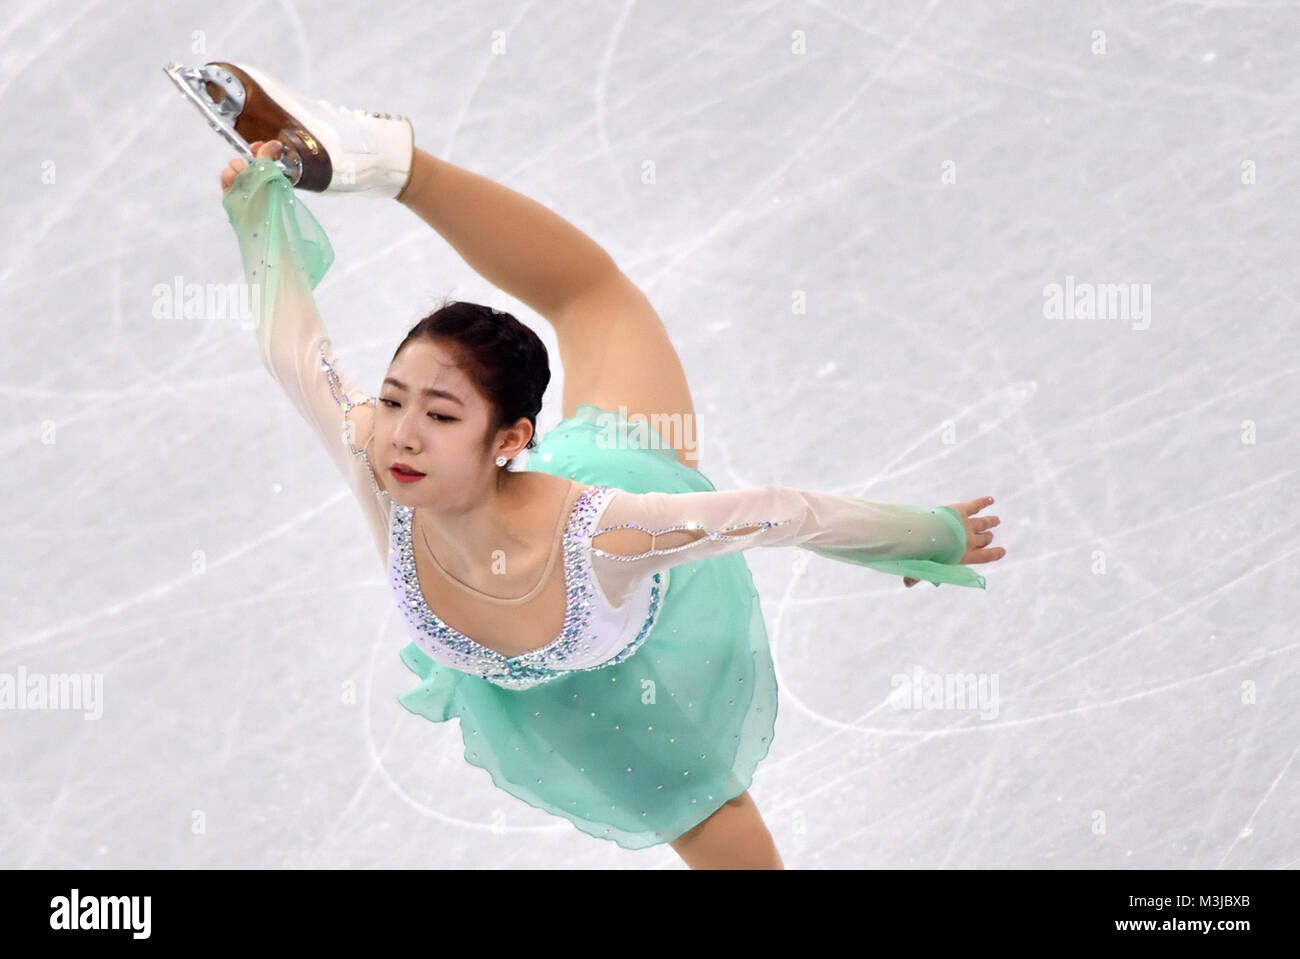 Gangneung, South Korea, 11 February 2018. Choi Da Bin of South Korea in action during the Olympic women's single short programme in the Gangneung Ice Arena in Gangneung, South Korea, 11 February 2018. Photo: Peter Kneffel/dpa/Alamy Live News Stock Photo